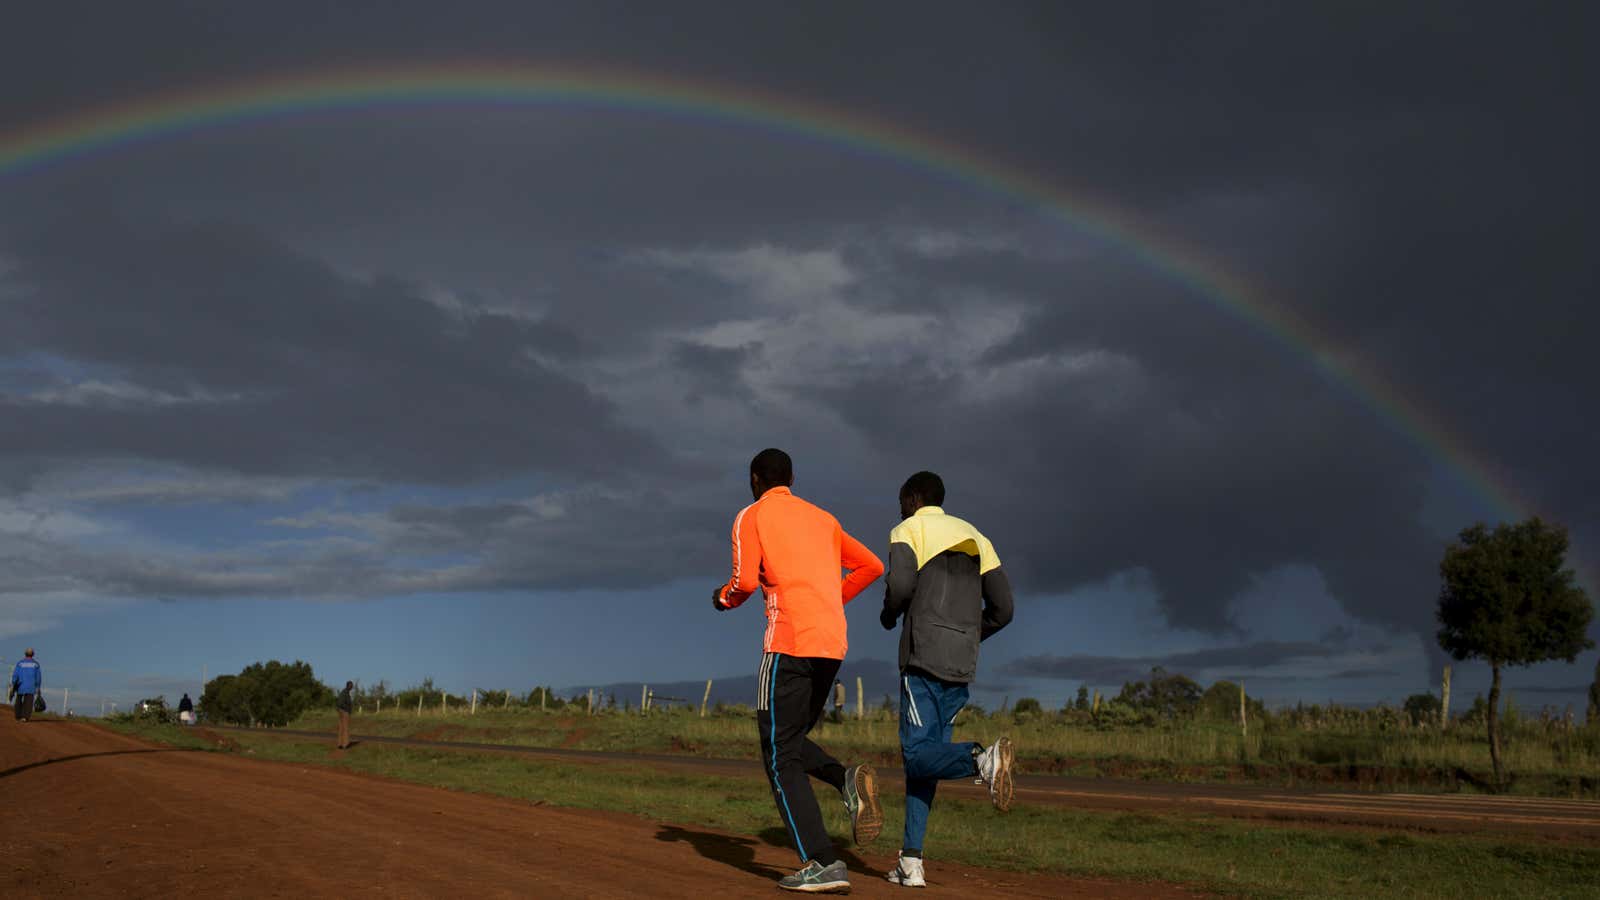 Athletes run during a training session near the Kenyan town of Iten sometimes called “the city of champions’.